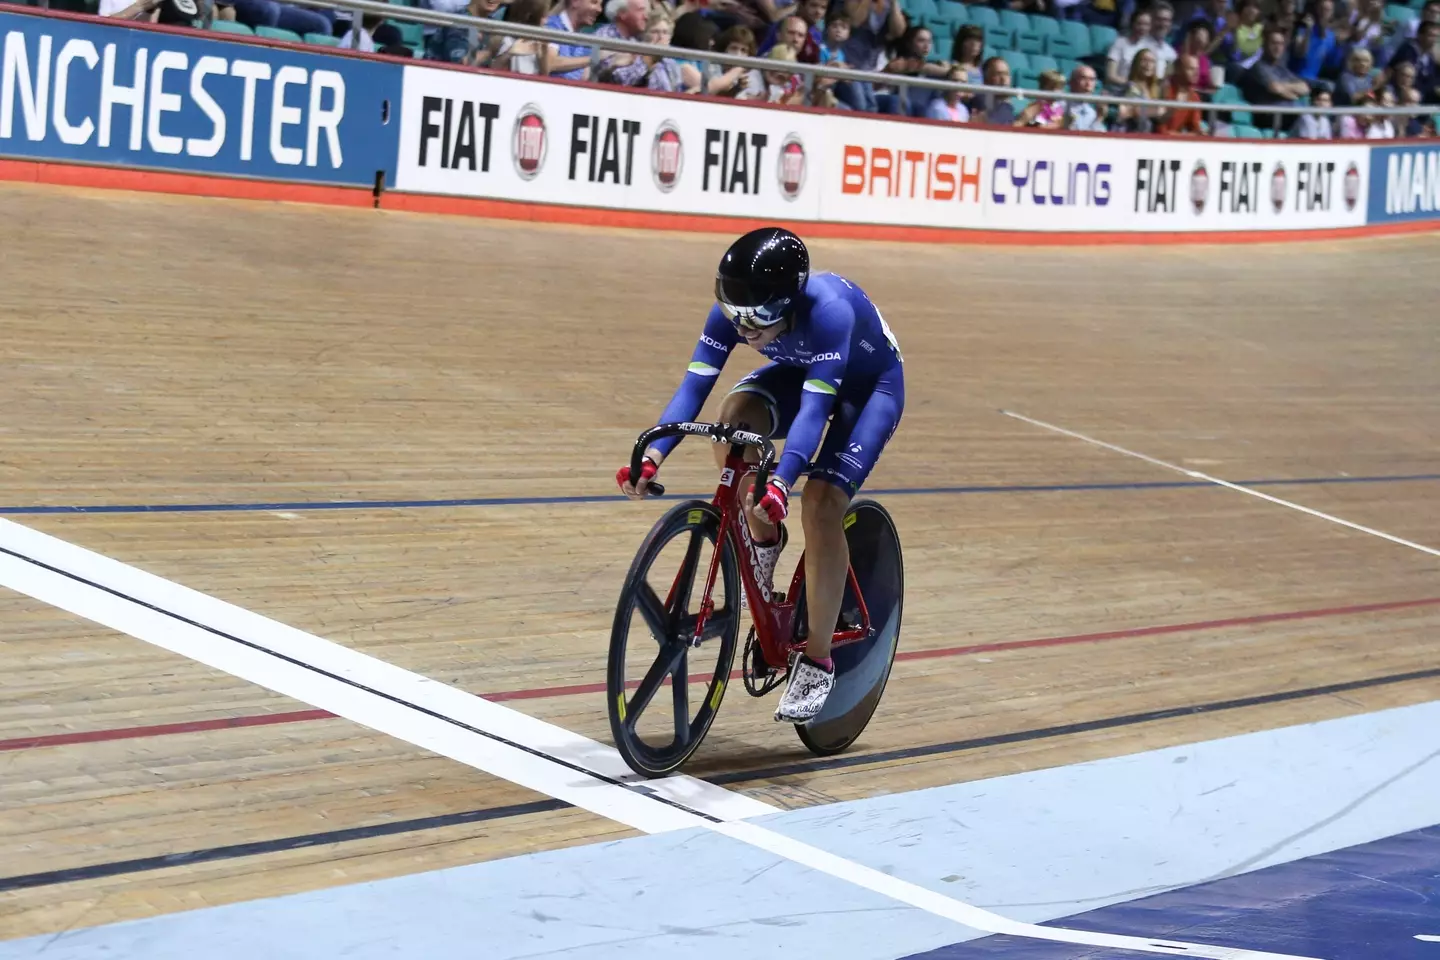 One of British Cycling’s most senior figures has signed a letter requesting a rule change that would stop transgender riders from competing in women’s events.